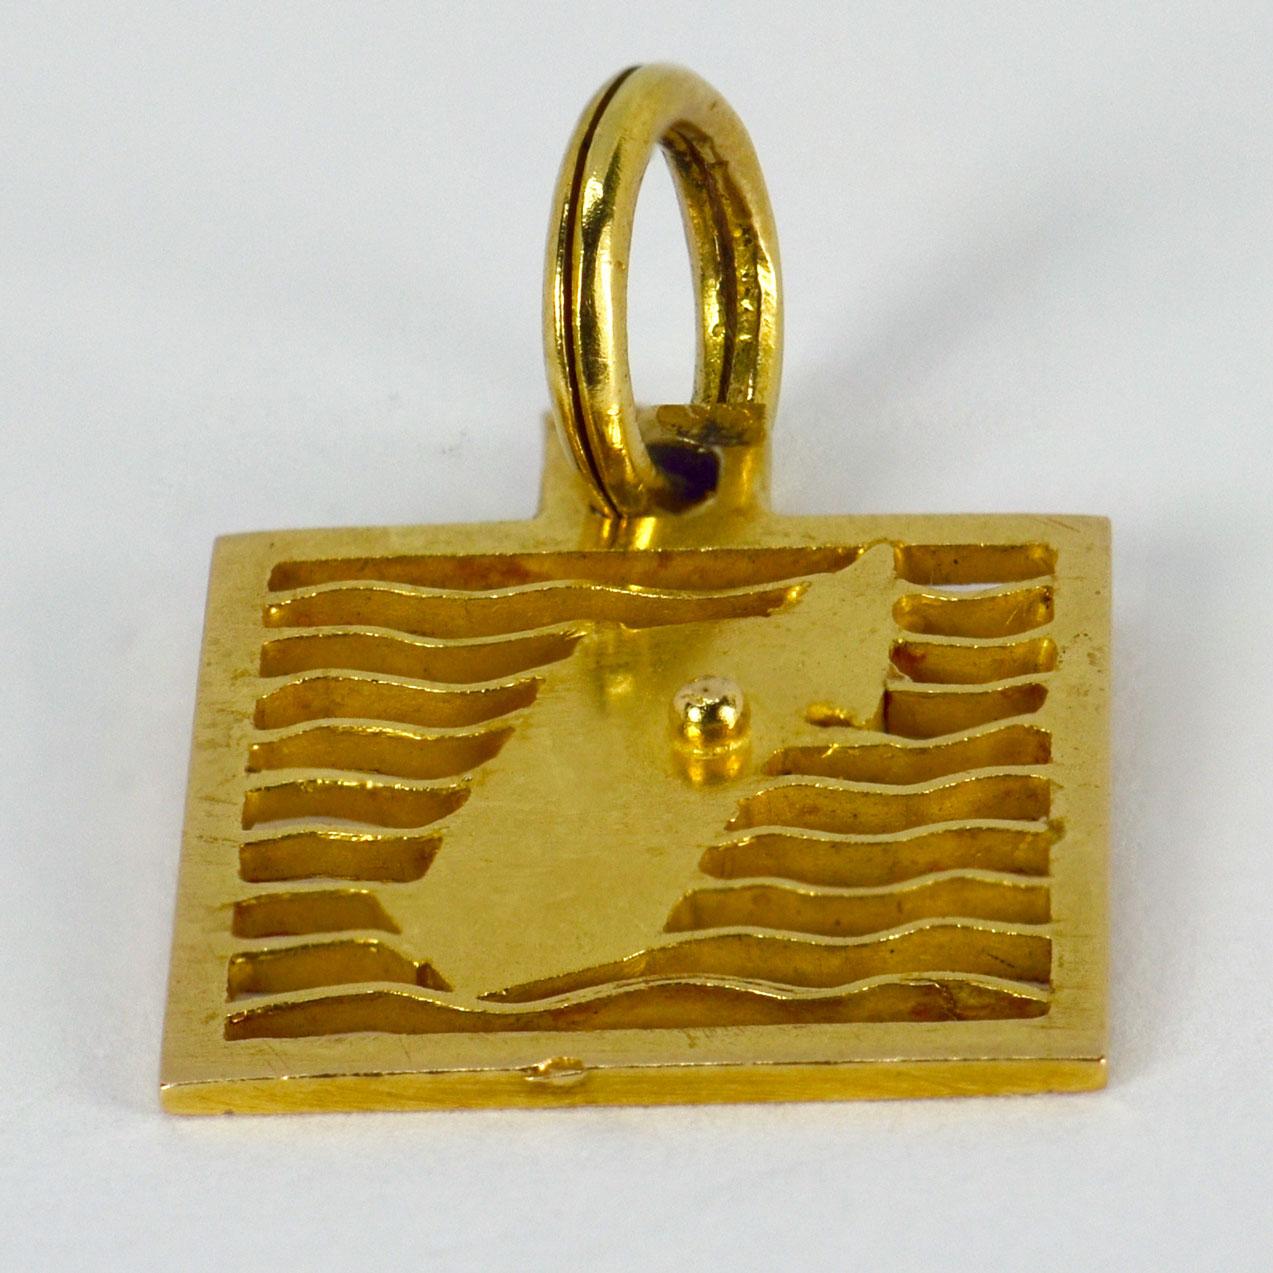 An 18 karat (18K)  yellow gold square charm pendant designed as a map of an island. Unmarked but tested as at least 18 karat gold.

Dimensions: 1.8 x 1.5 x 0.2 cm (not including jump ring)
Weight: 2.40 grams
